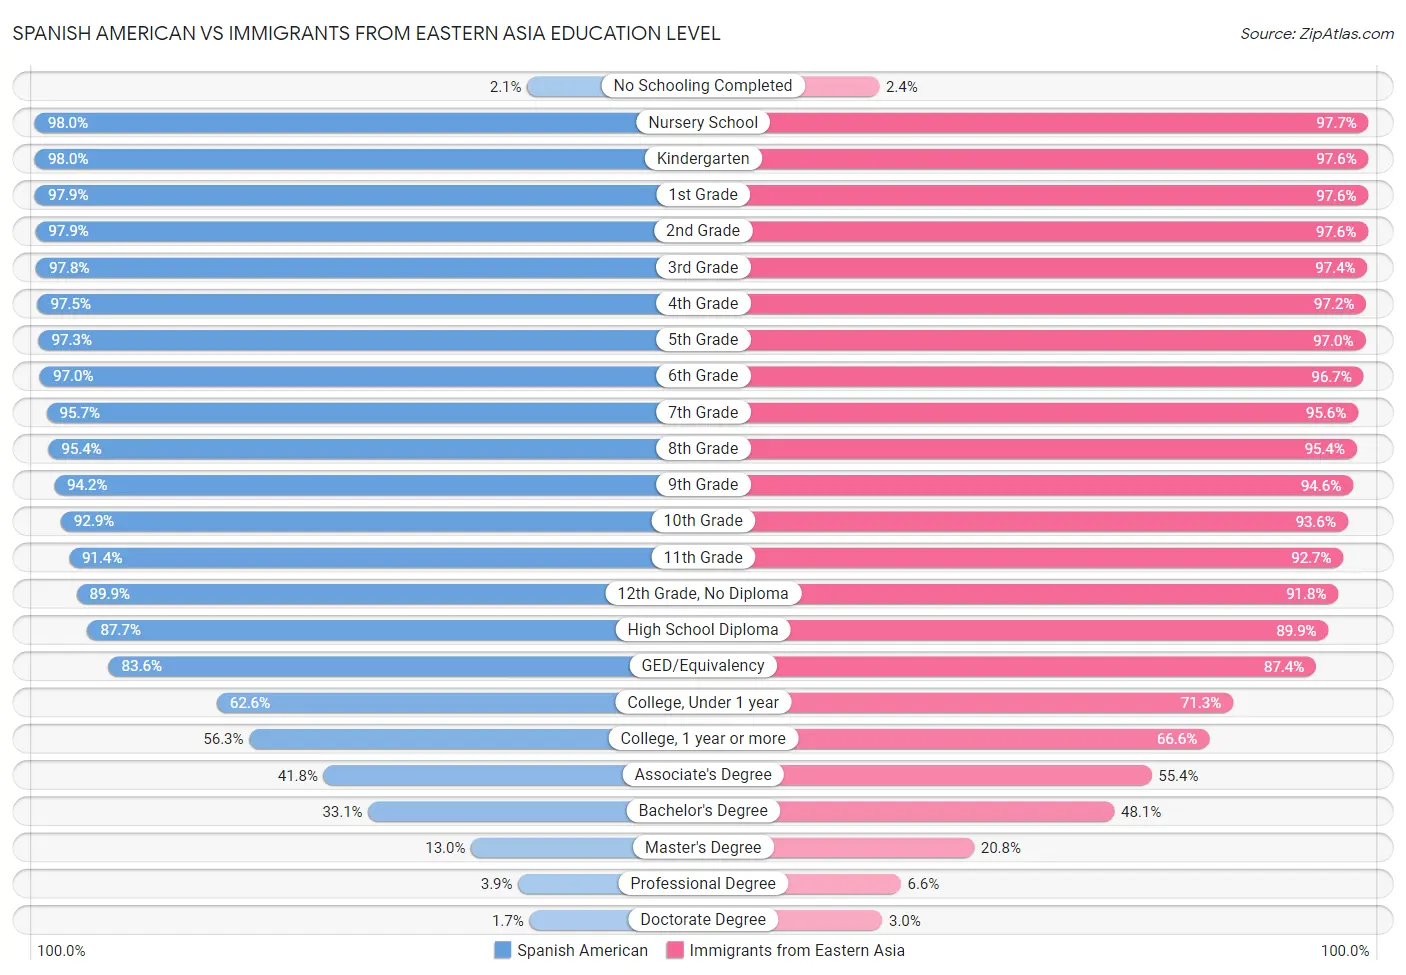 Spanish American vs Immigrants from Eastern Asia Education Level